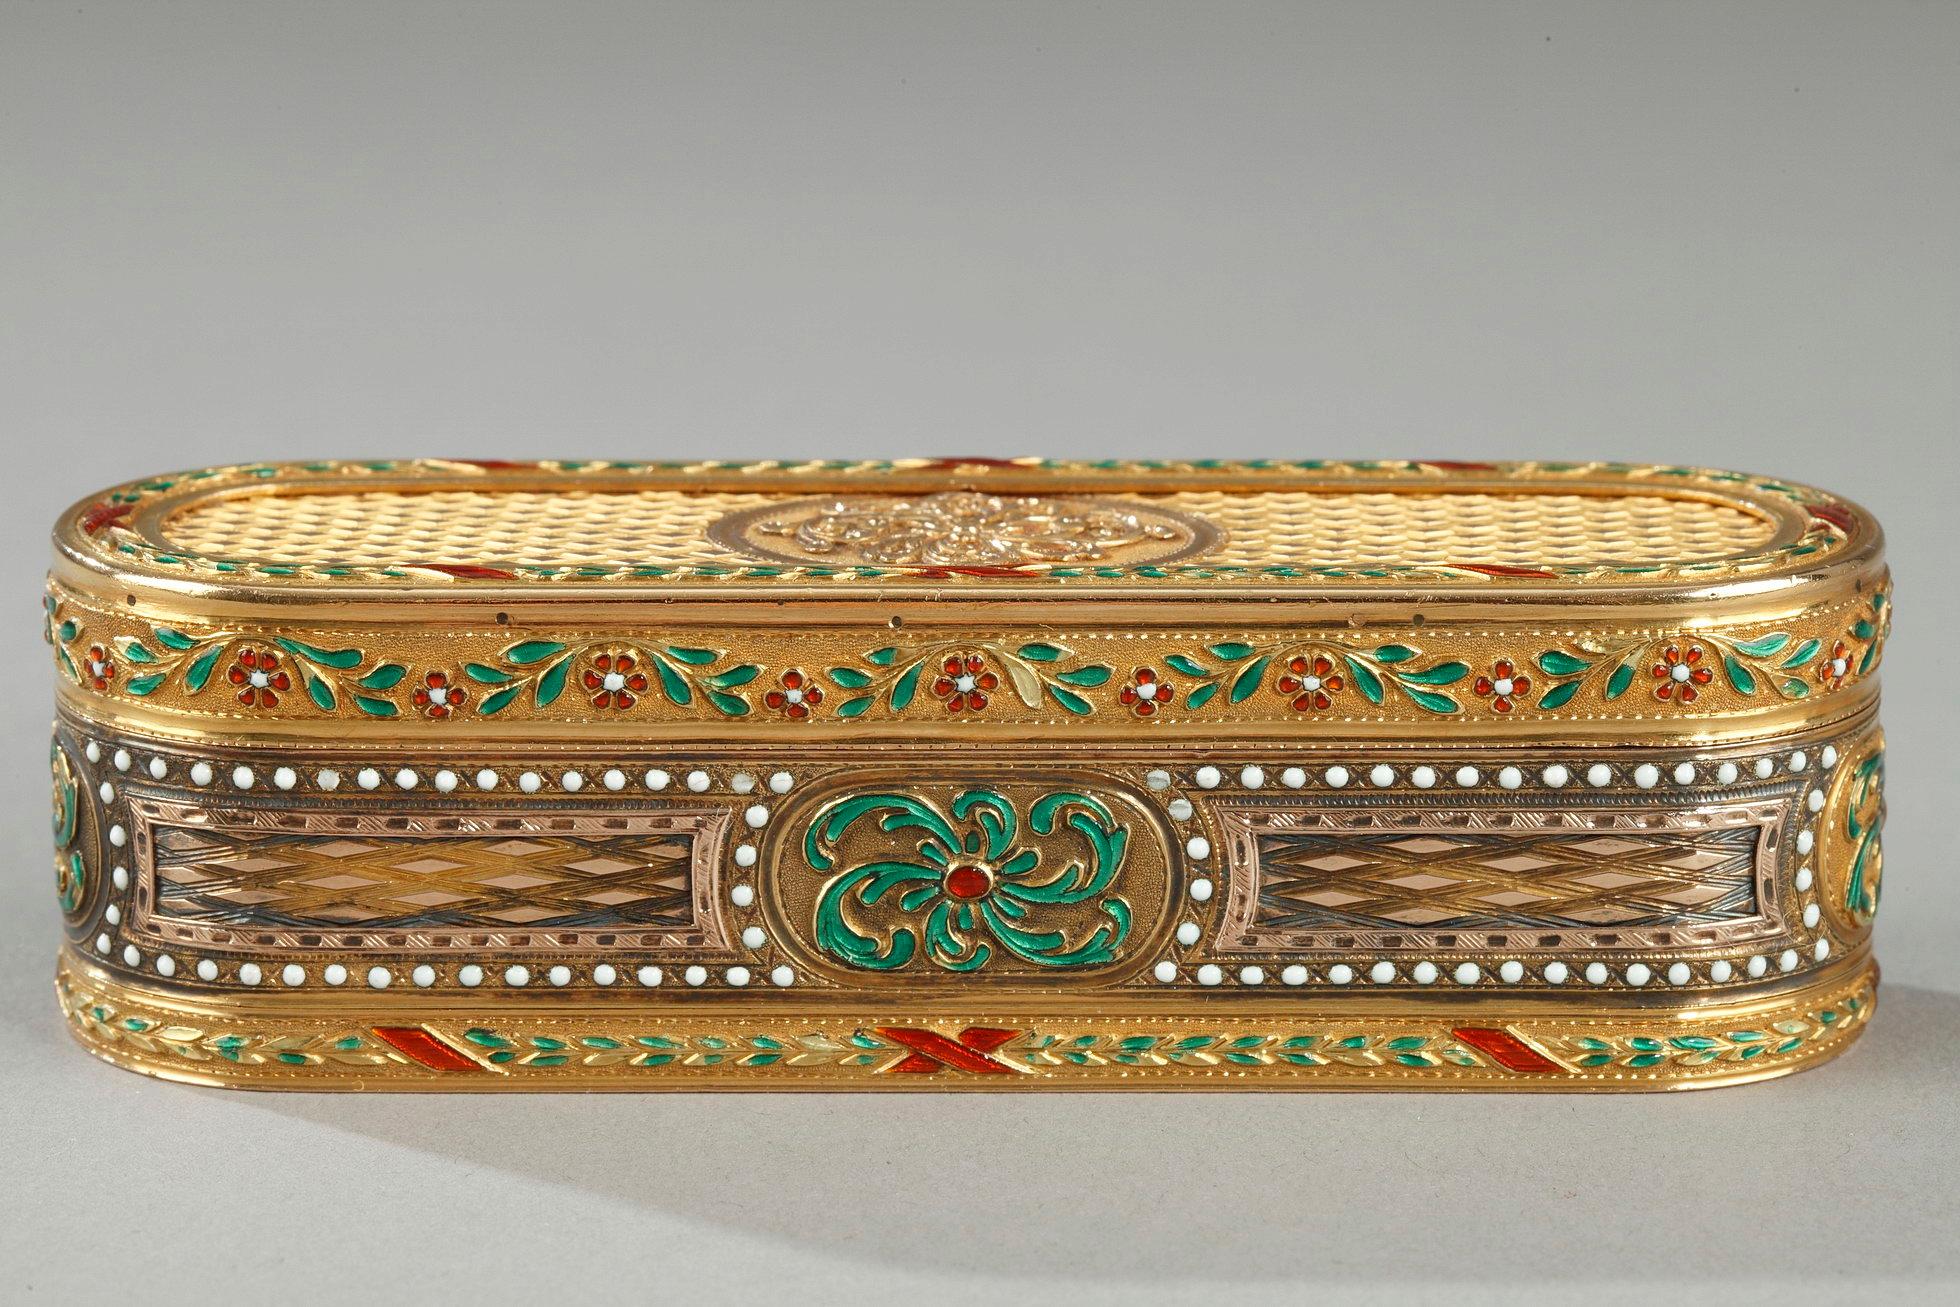 French 18th Century Gold and Enamel Snuff-Box